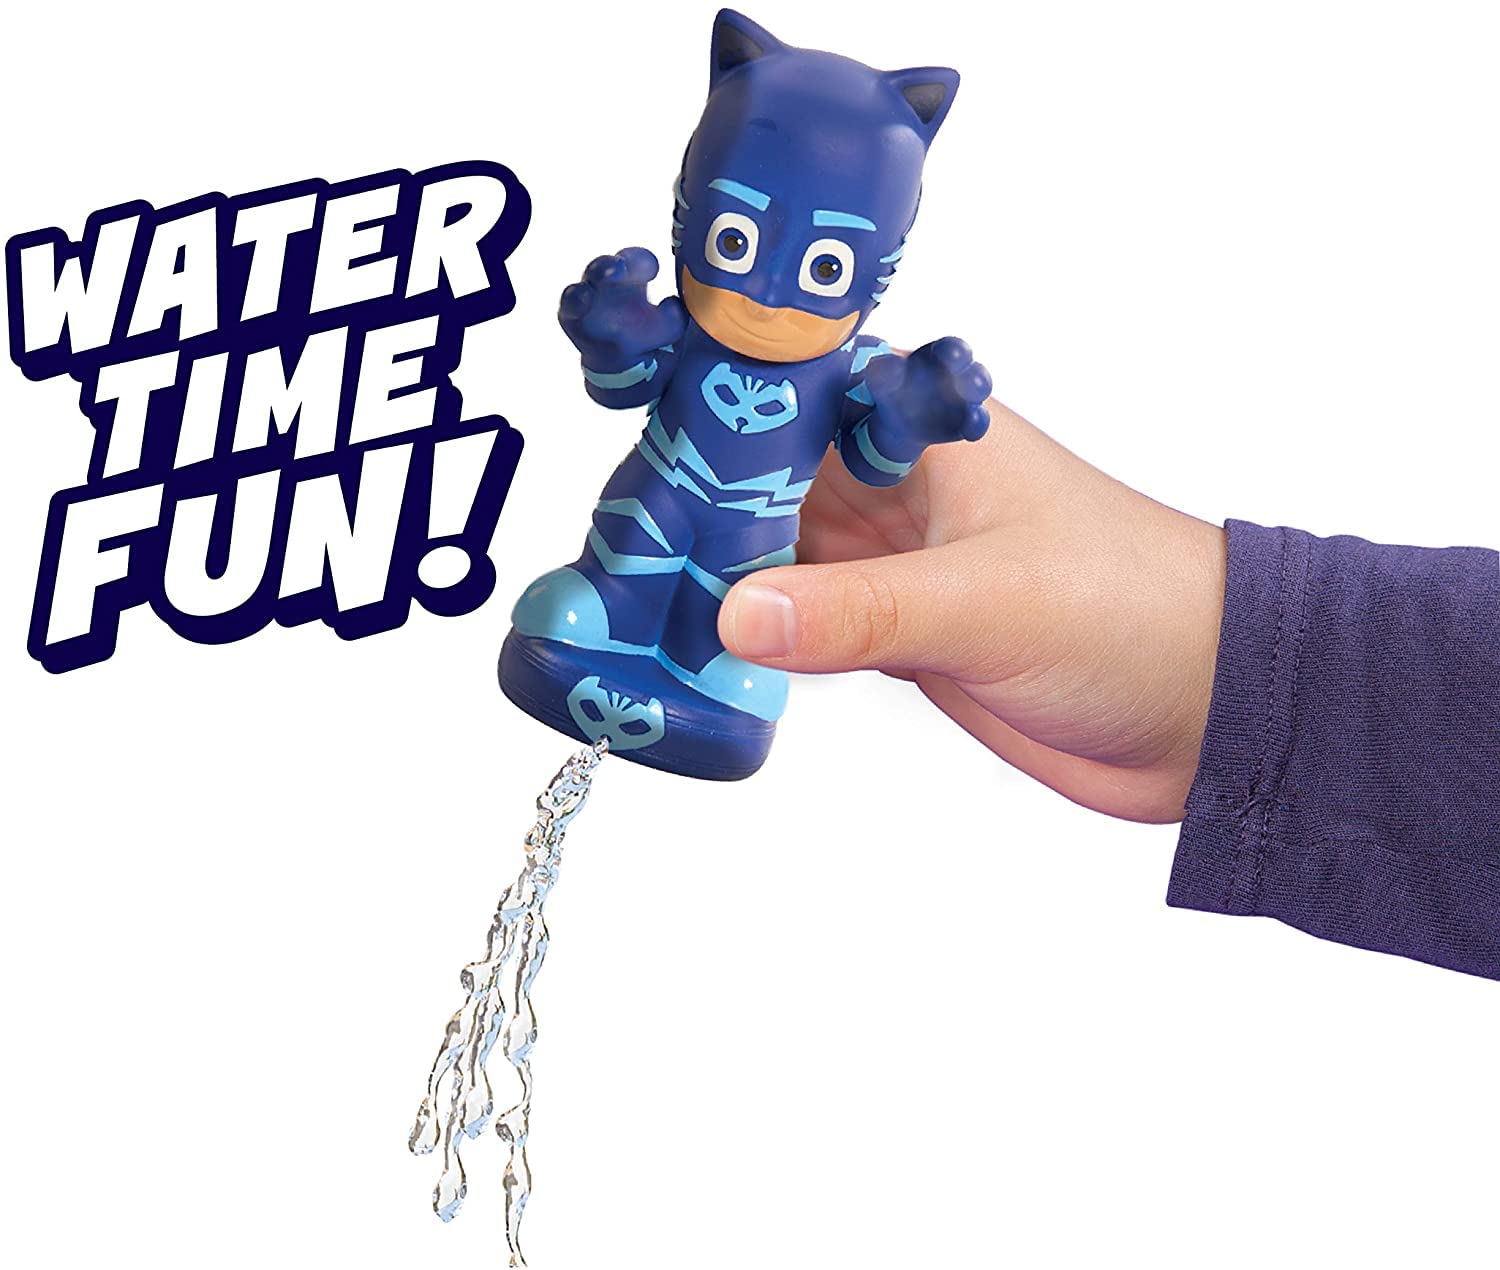 PJ Masks Bath Toy Set, Includes Catboy, Gekko, and Owlette Water Toys for Kids, Kids Toys for Ages 3 Up, Small Gifts and Presents by Just Play